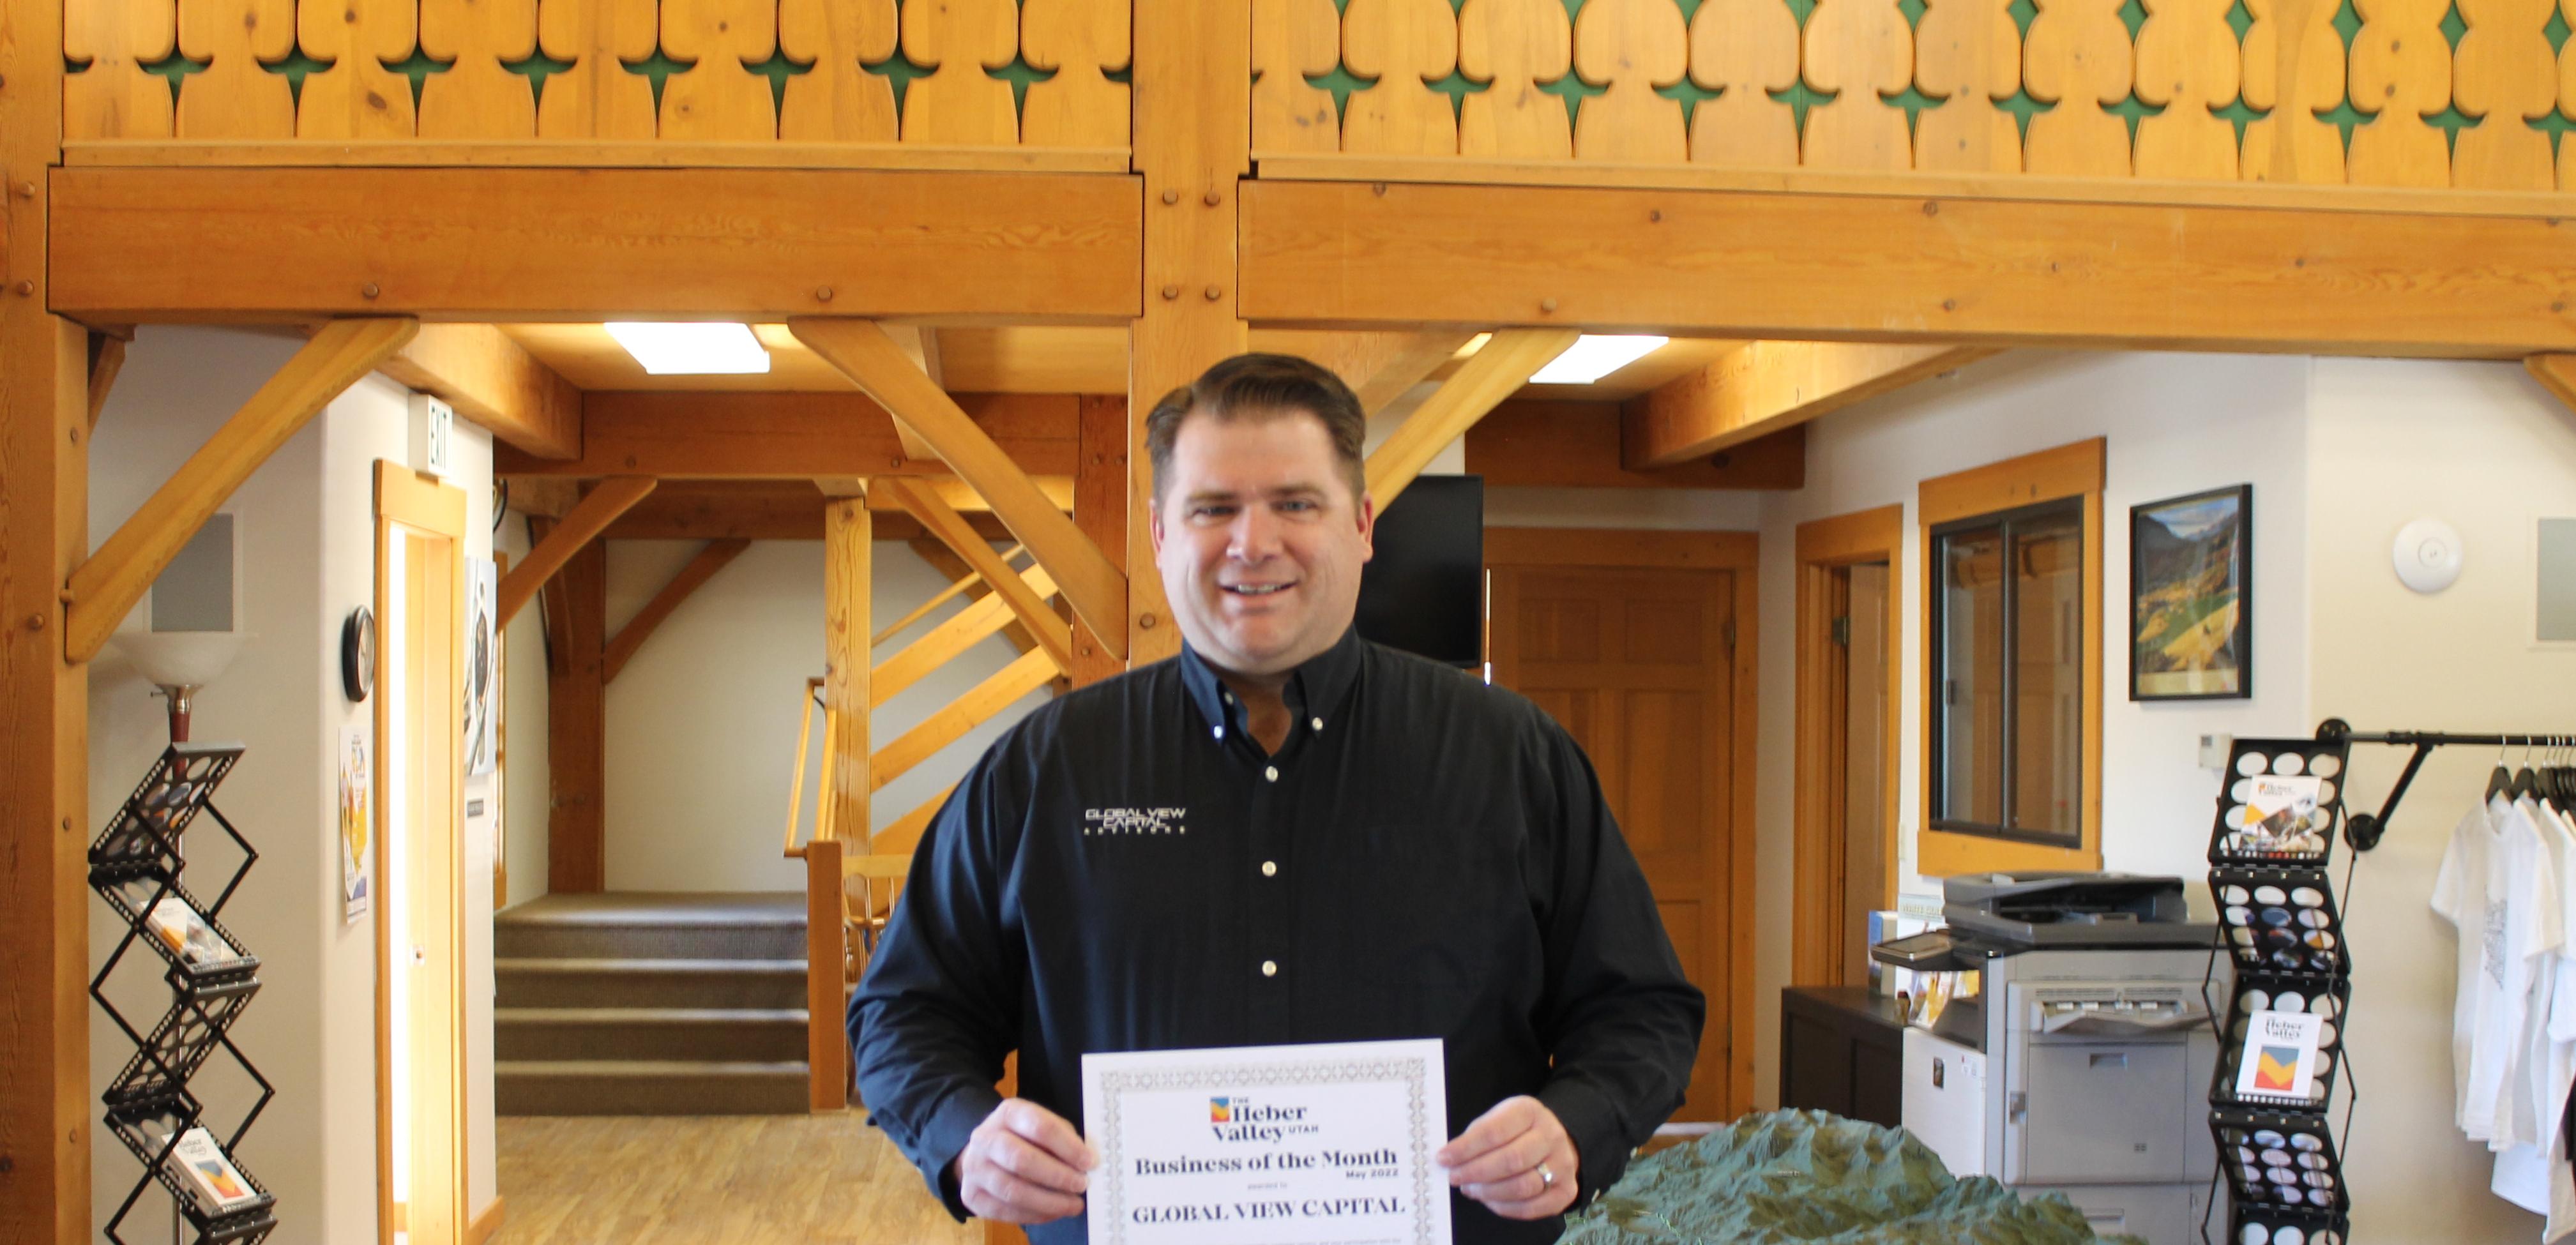 Heber Valley Chamber Business of the Month